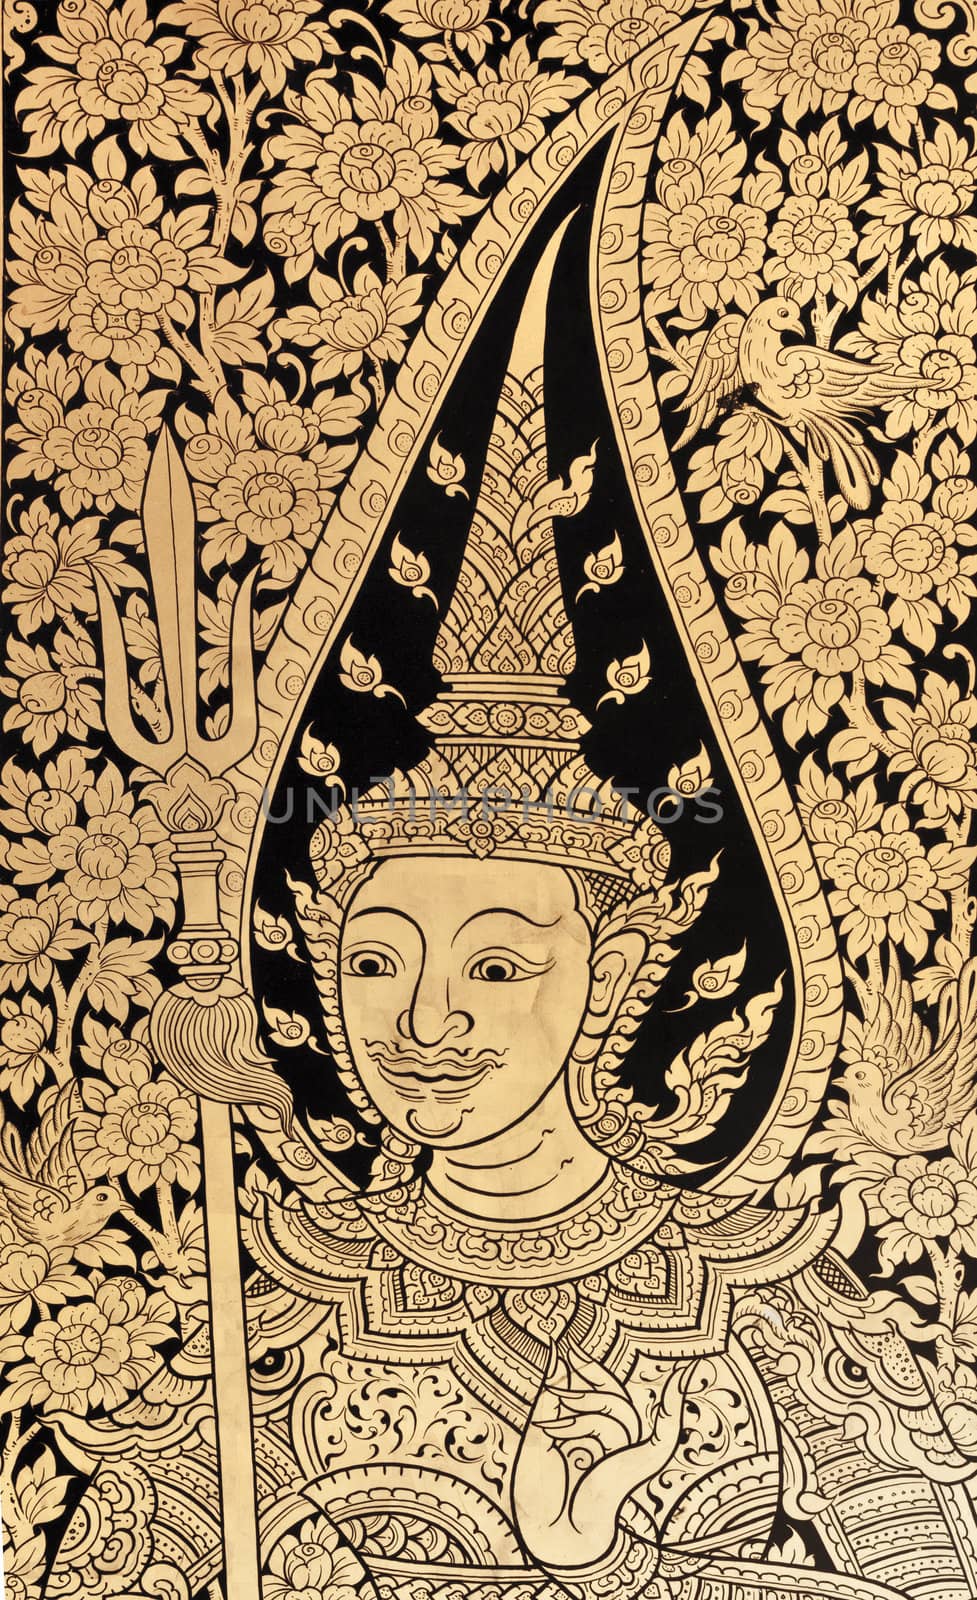 generality in thailand, any kind of art decorated in buddhist church, temple pavilion, temple hall, monk's house etc. created with money donated by people to hire artist. they are public domain or treasure of buddhism, no restrict in copy or use, no name of artist appear (but, if there is artist name, it only for tell who is the artist of work, not for copyright.) this photo is taken under these conditions.